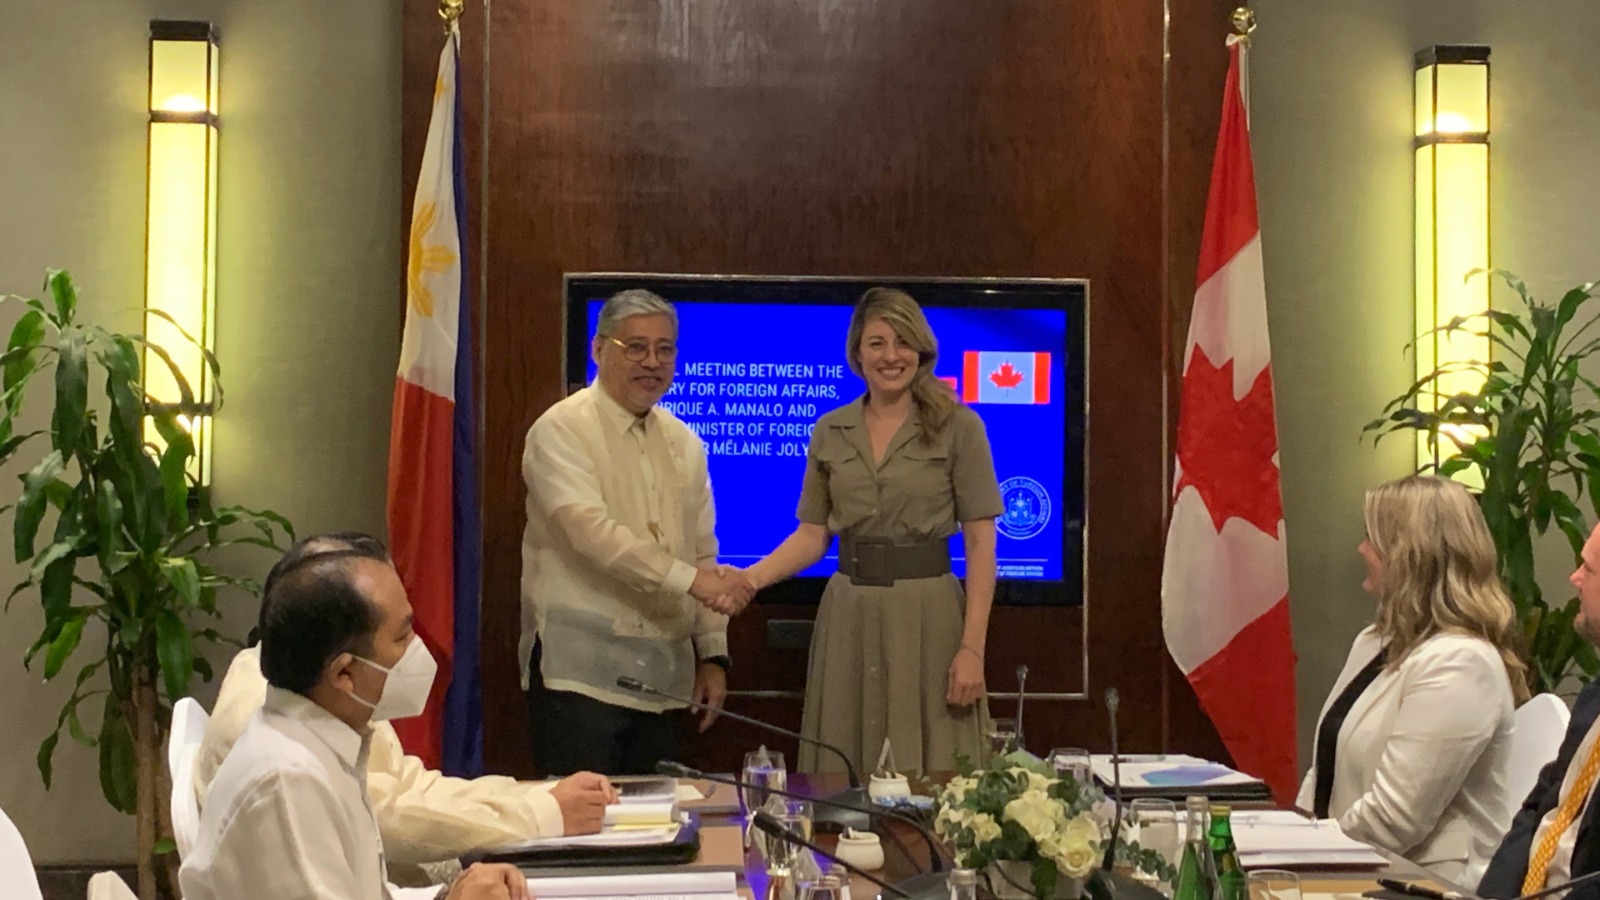 Canadian Foreign Minister Mélanie Joly says now "is the time for ambition" between Manila and Ottawa